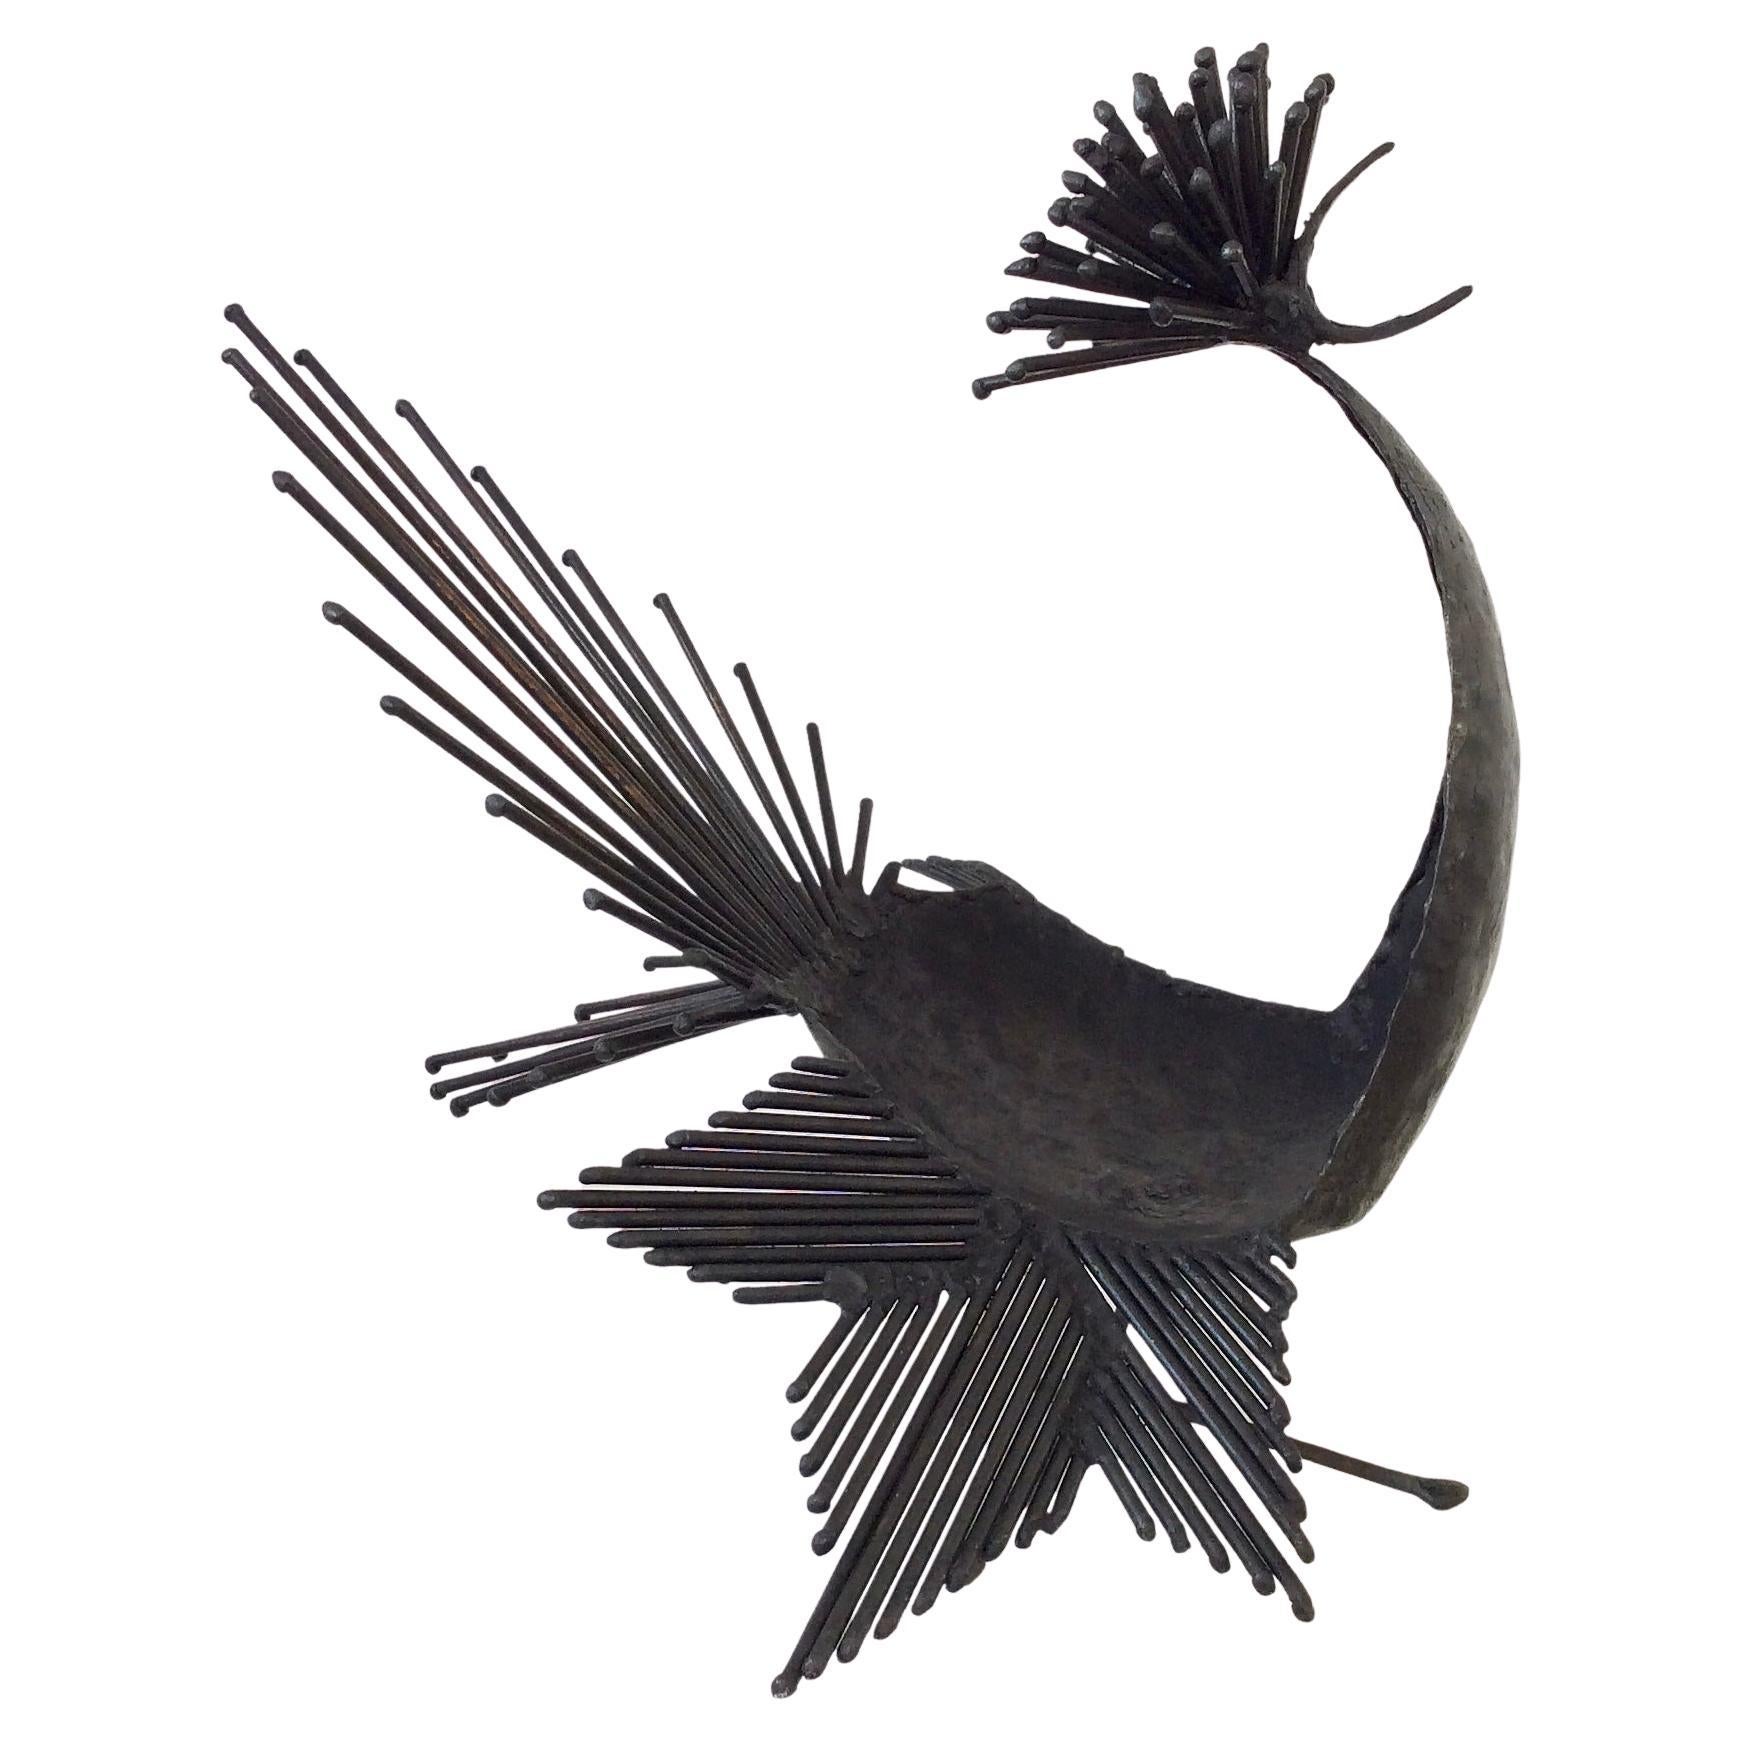 Mid-century bird sculpture by Michel Anasse, circa 1960, France.
Black patinated welded metal.
Dimensions: 38 cm H, 38 cm D, 32 cm W.
Good original condition.
All purchases are covered by our Buyer Protection Guarantee.
This item can be returned